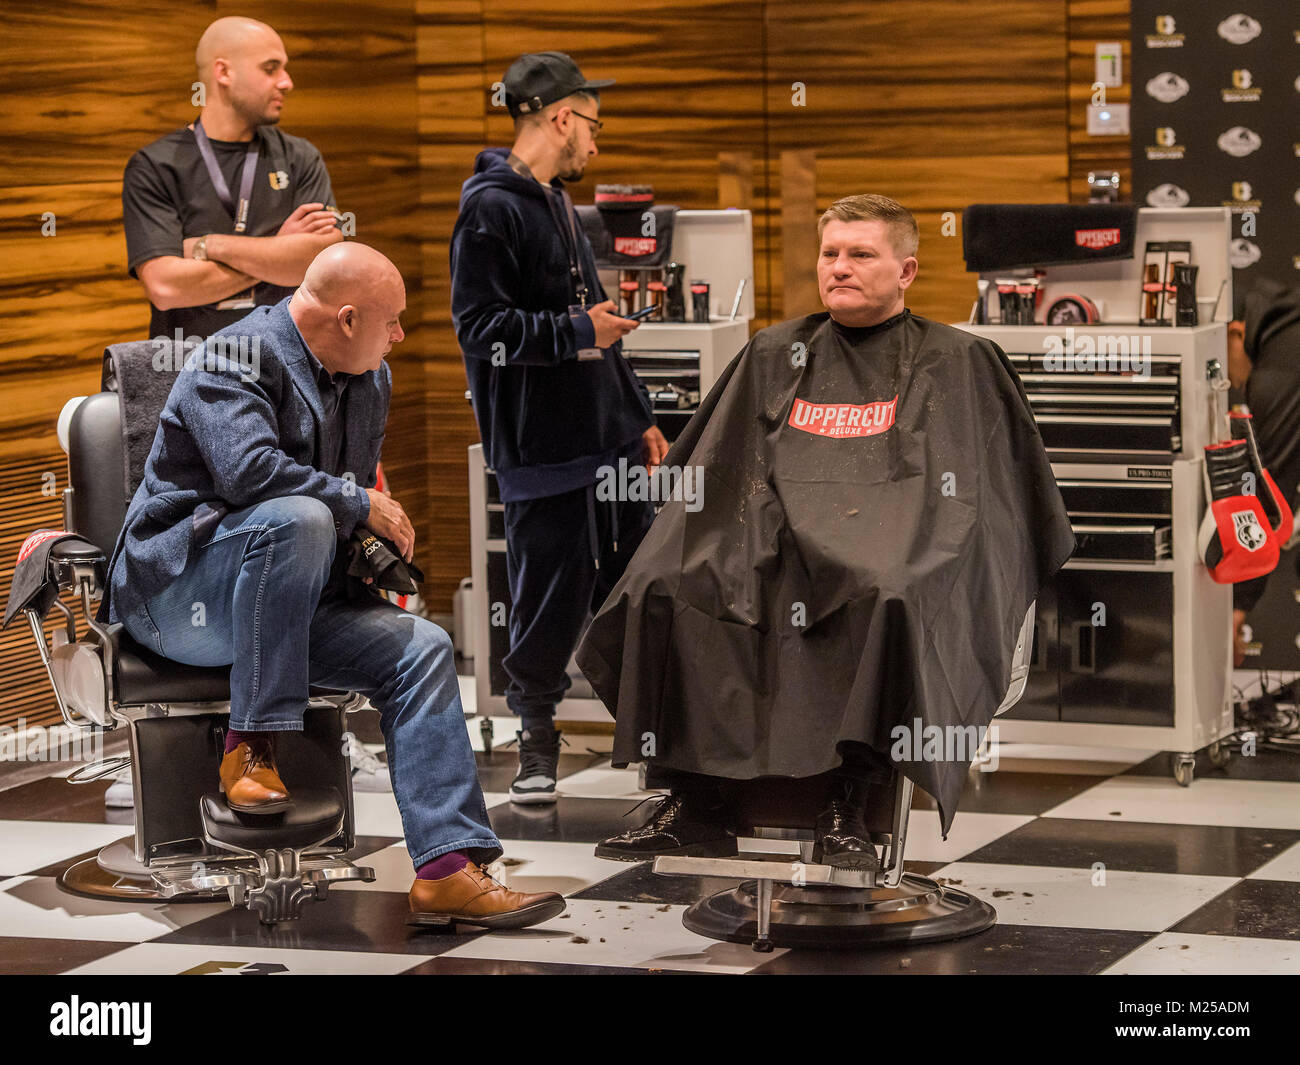 London, UK. 5th February, 2018. Ricky Hatton gets a quick haircut before the launch. The official launch of ULTIMATE BOXER, Britain’s first Boxing Entertainment brand, at ME London Hotel. The single elimination format, approved by the British Boxing Board of Control, will give young untapped talented British professional-boxers life changing career opportunities, with large cash prizes on offer for the tournament champion. Credit: Guy Bell/Alamy Live News Stock Photo